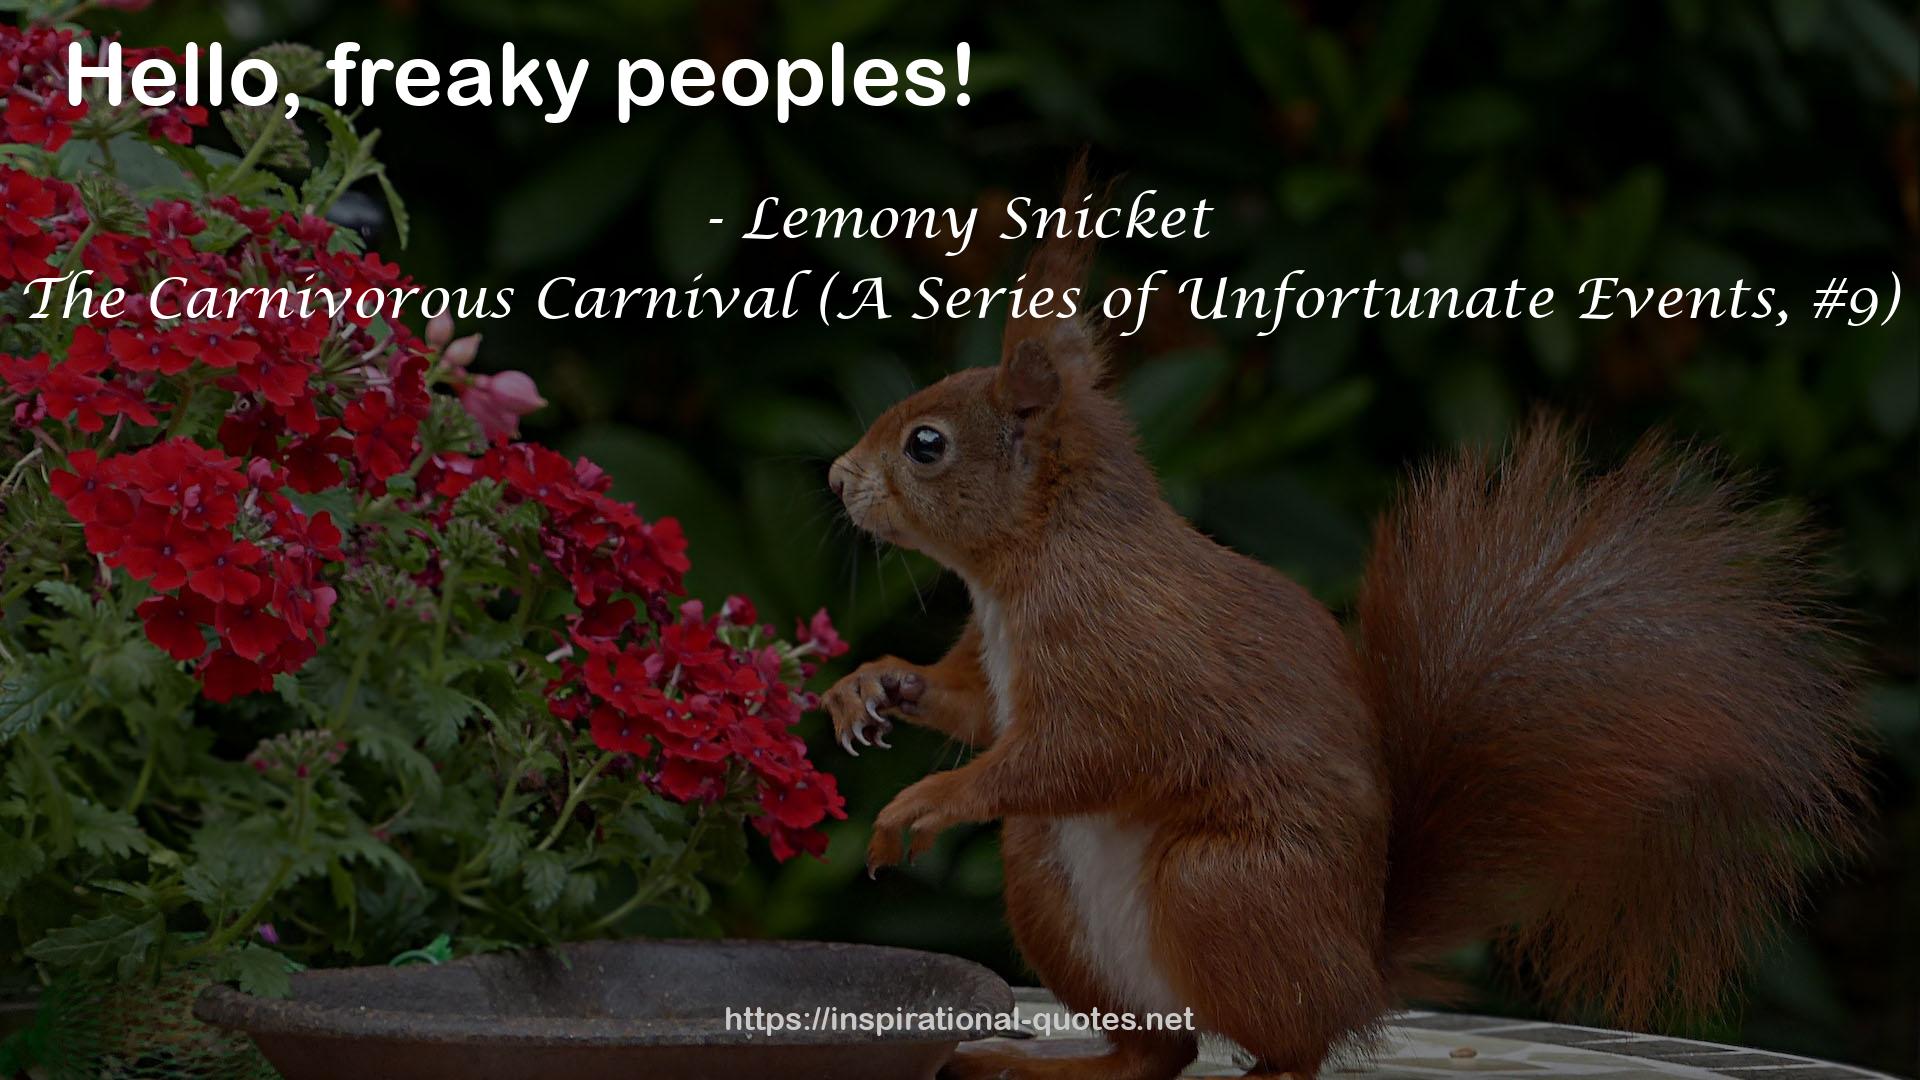 The Carnivorous Carnival (A Series of Unfortunate Events, #9) QUOTES